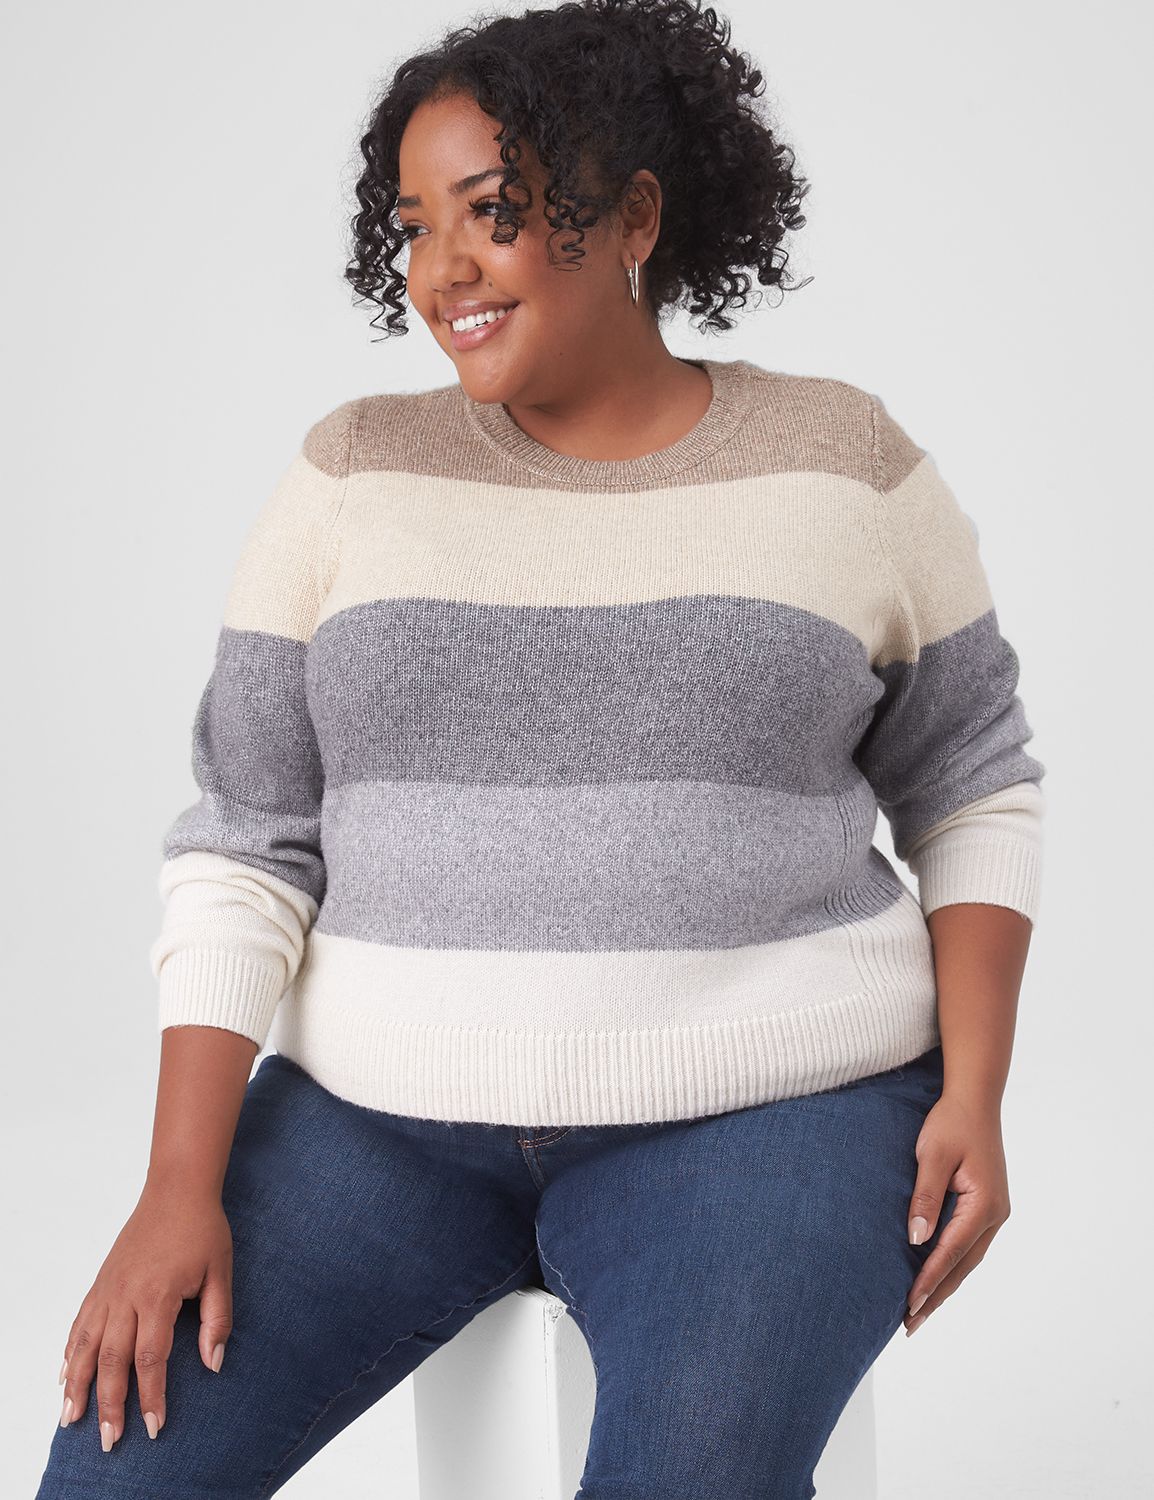 Lane Bryant Classic Crew-Neck Striped Pullover Sweater 10/12 Oatmeal